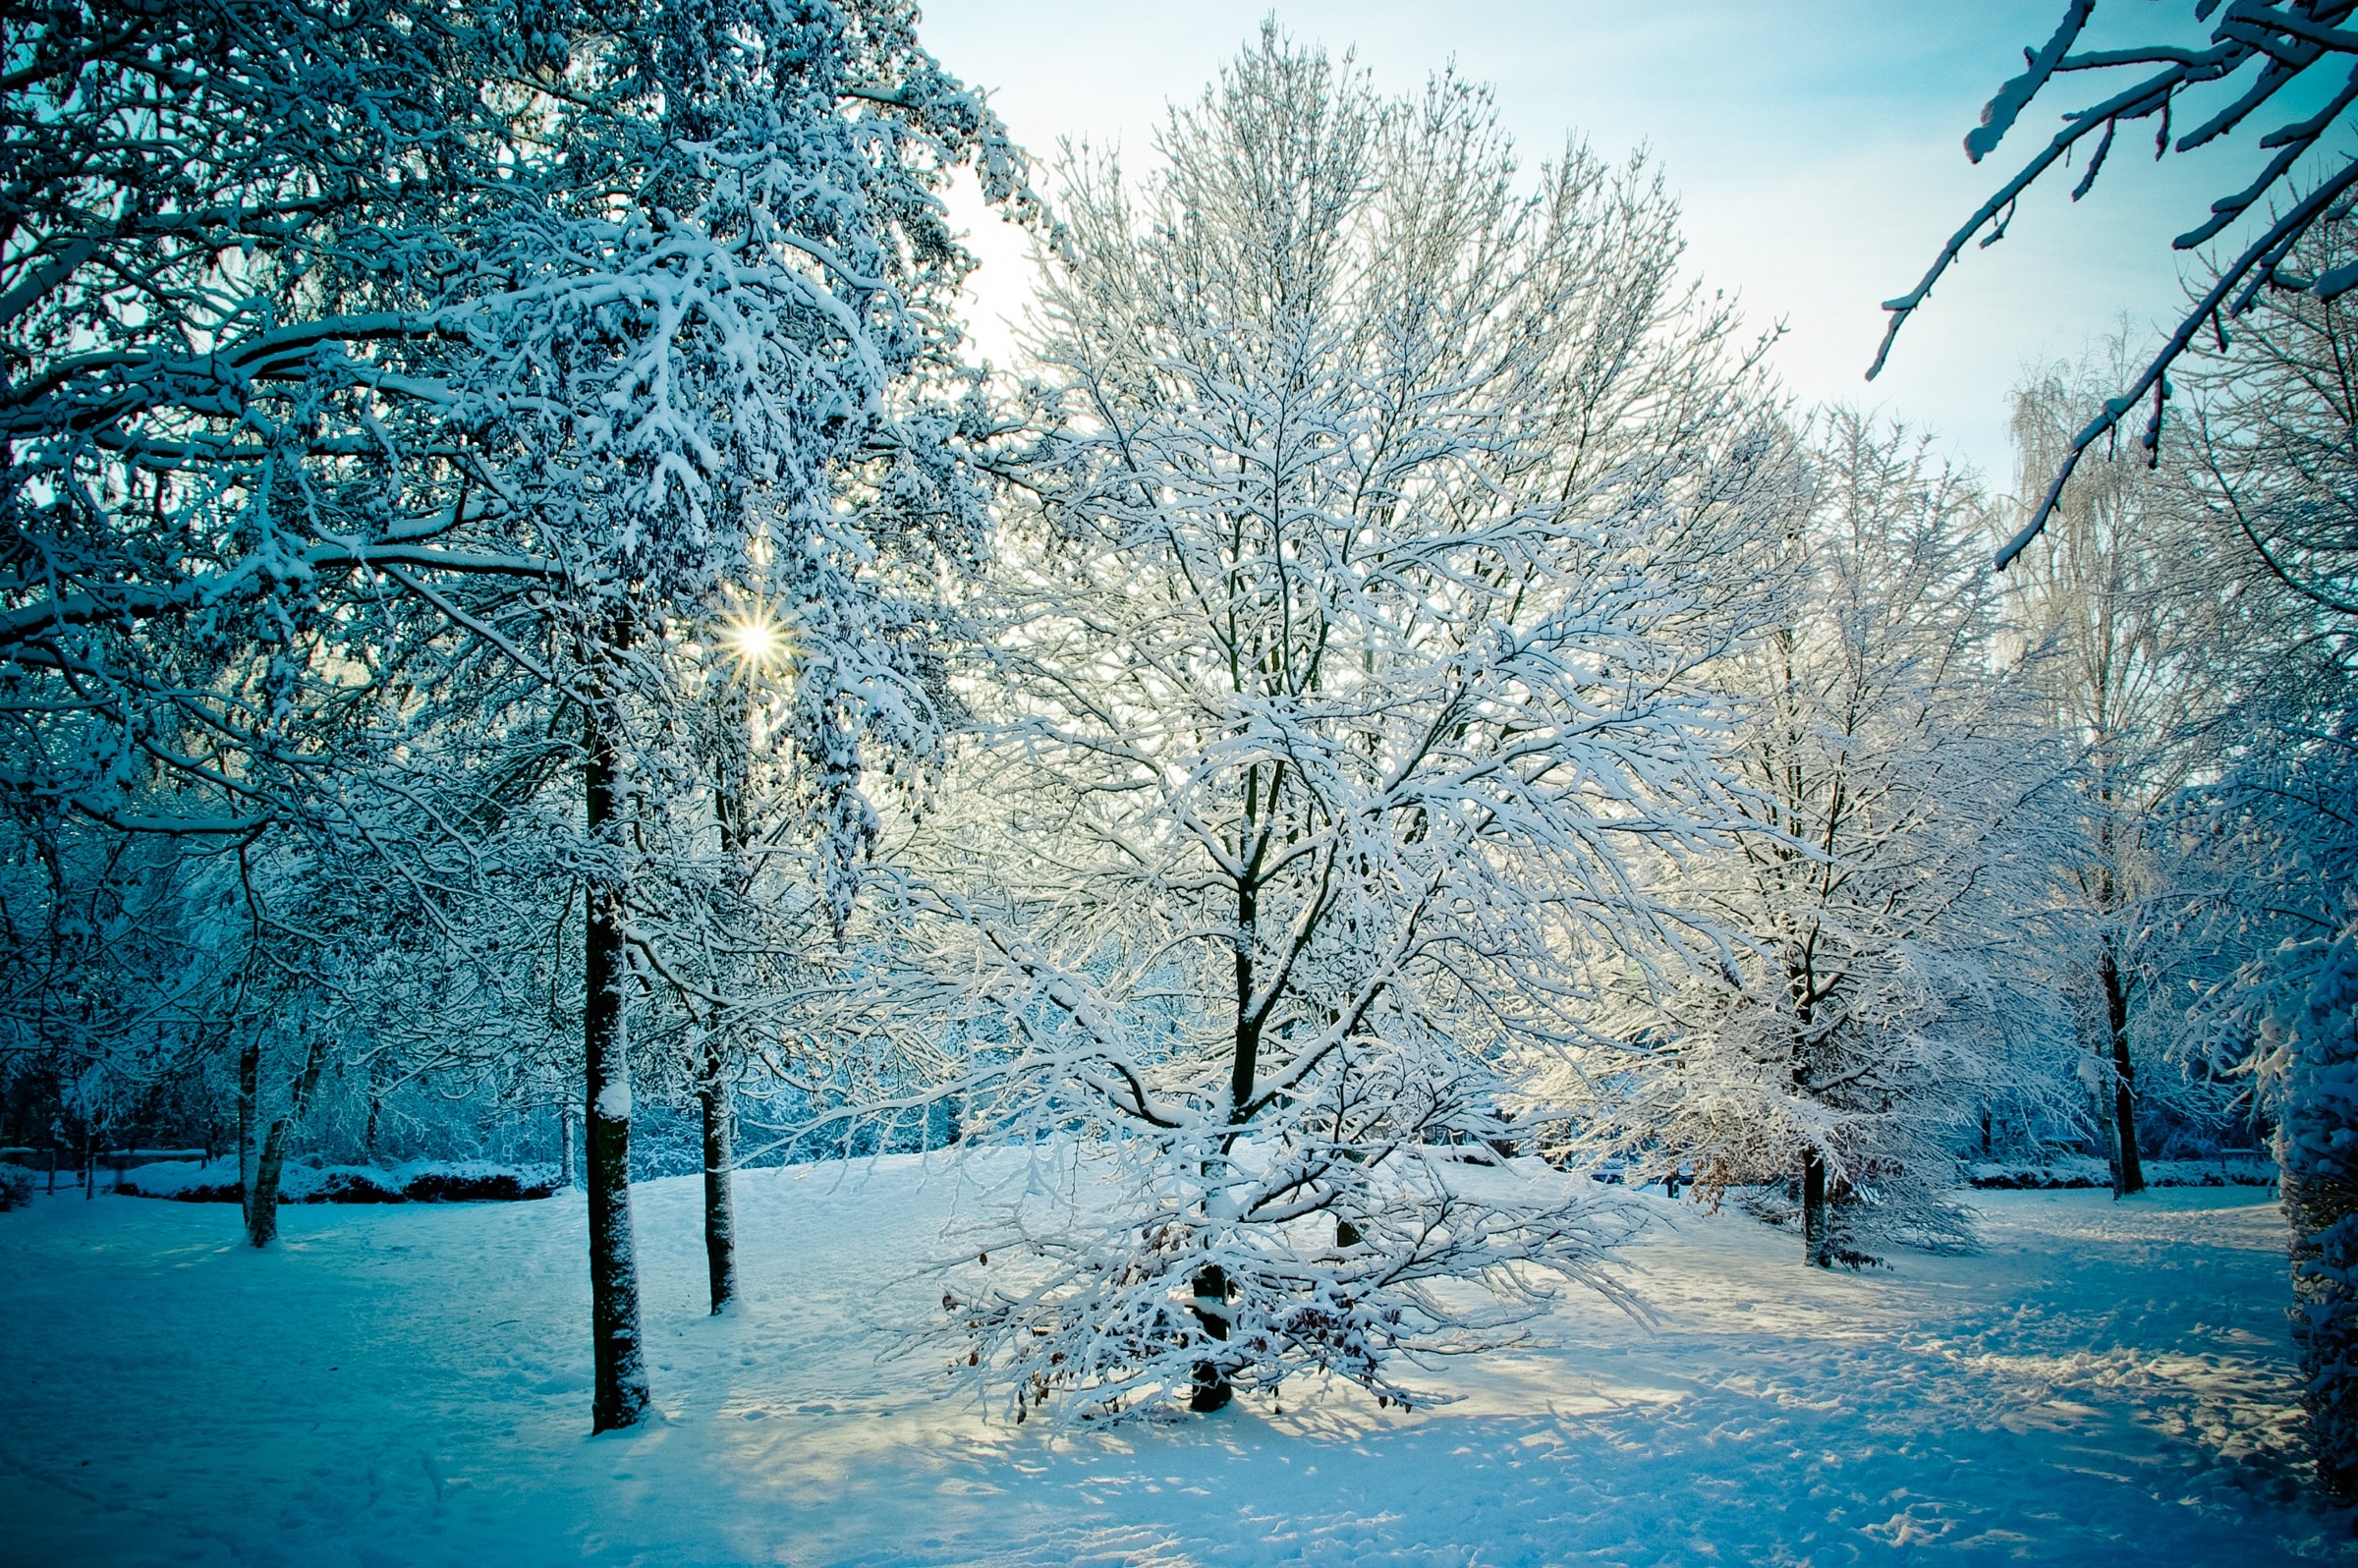 Sunset, Wintry, Trees, Snowy, Back Light, winter, cold temperature